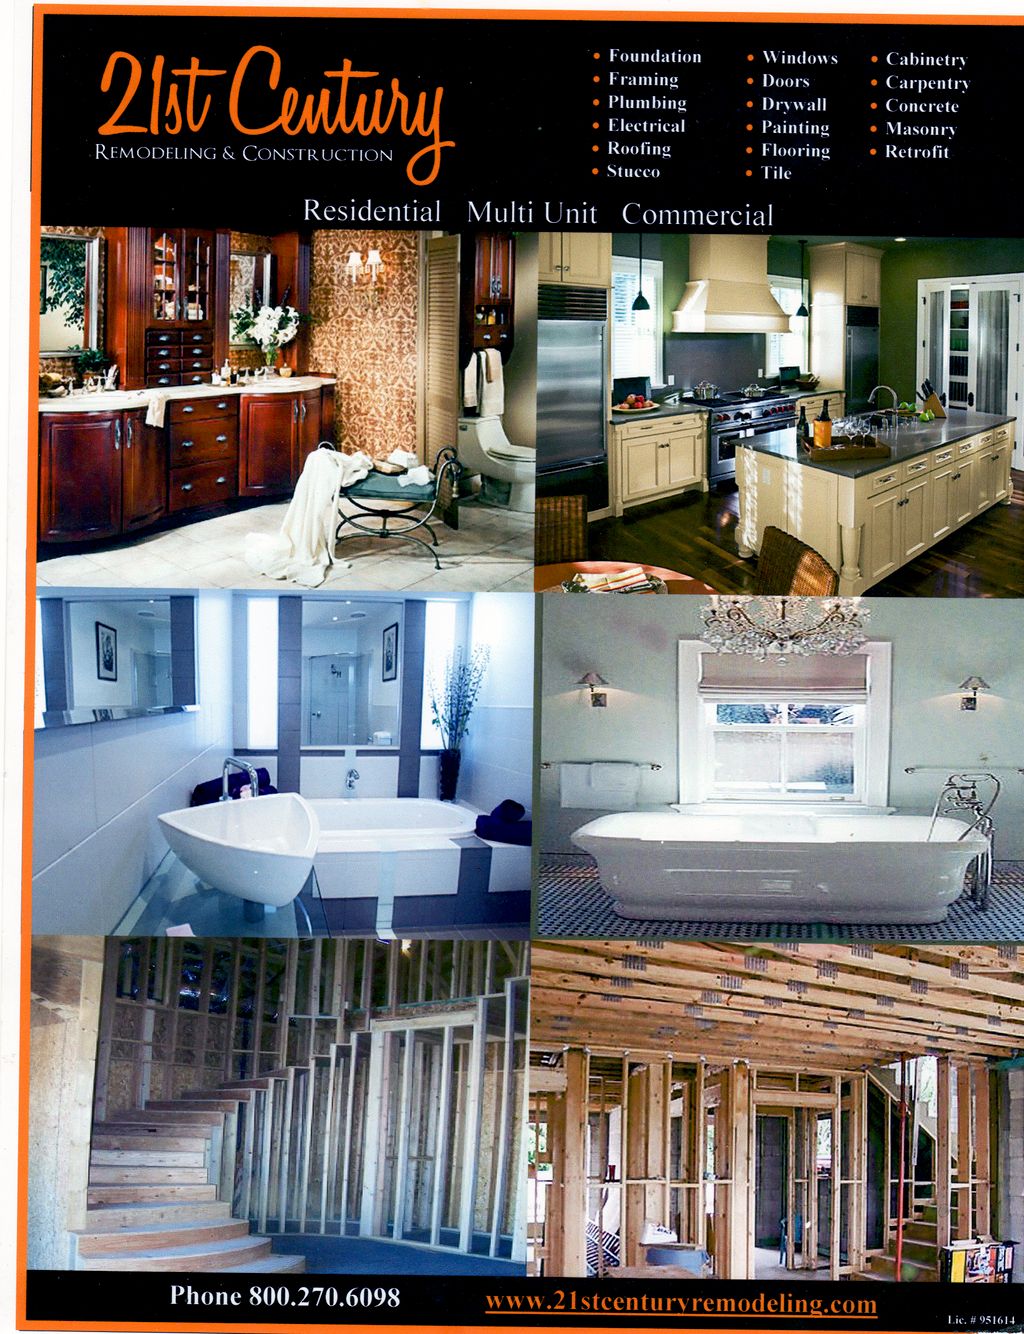 21st Century Remodeling and Construction